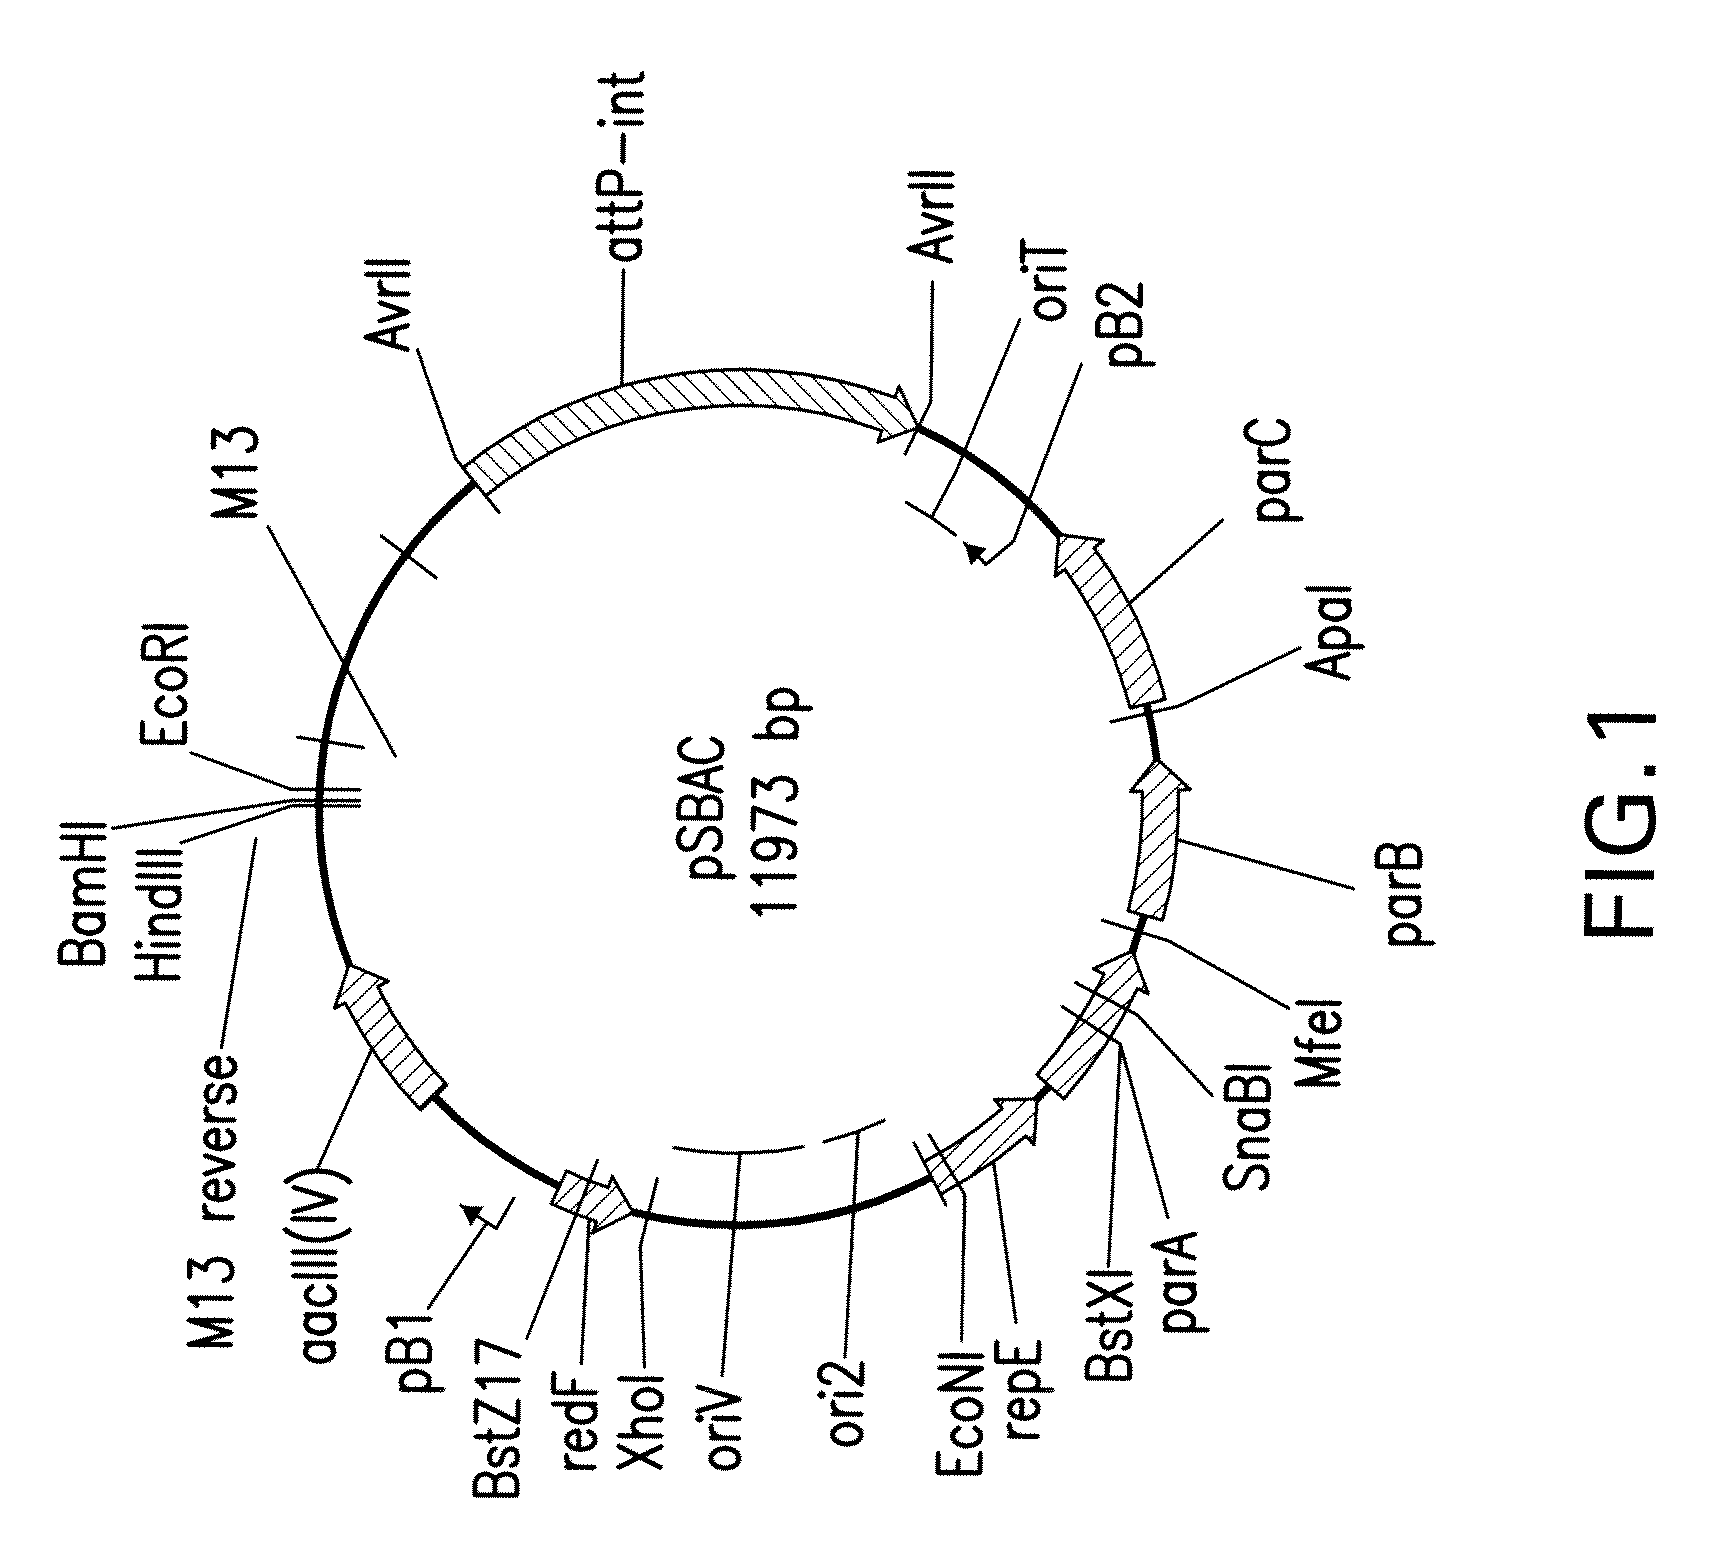 Vectors and Methods for Cloning Gene Clusters or Portions Thereof